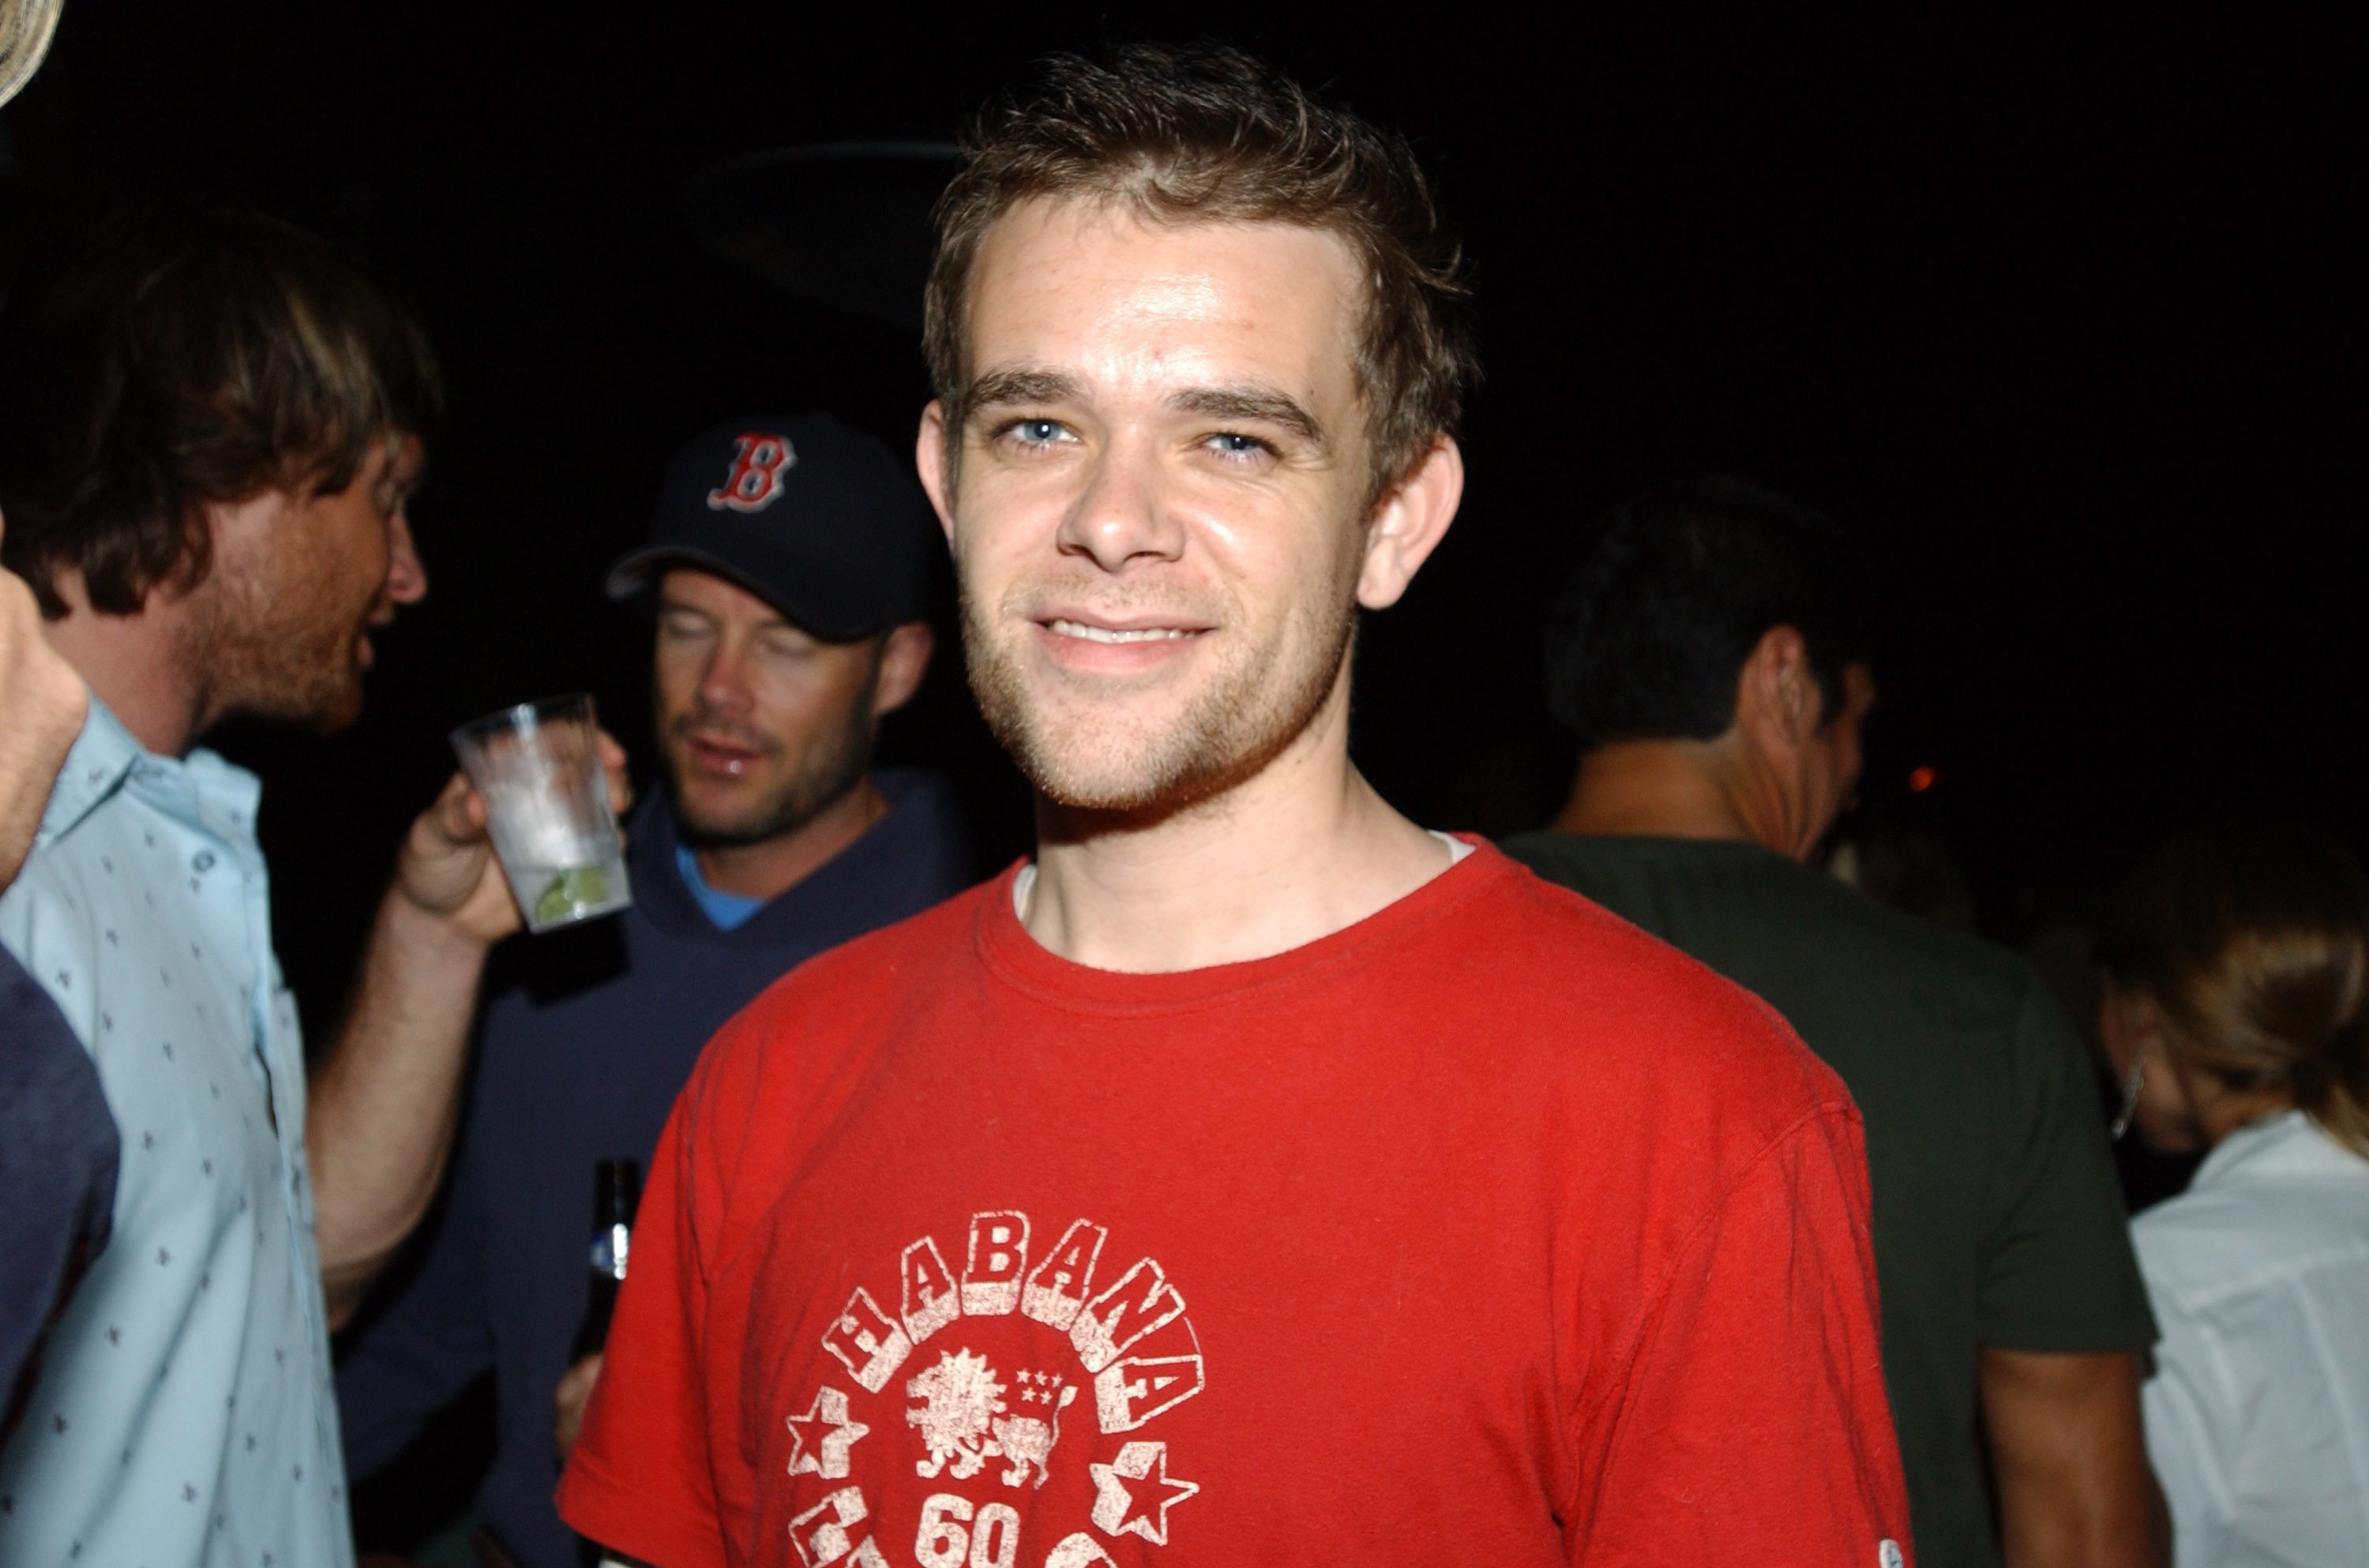 An undated photo of child star actor Nick Stahl in a red T-shirt | Photo: Getty Images